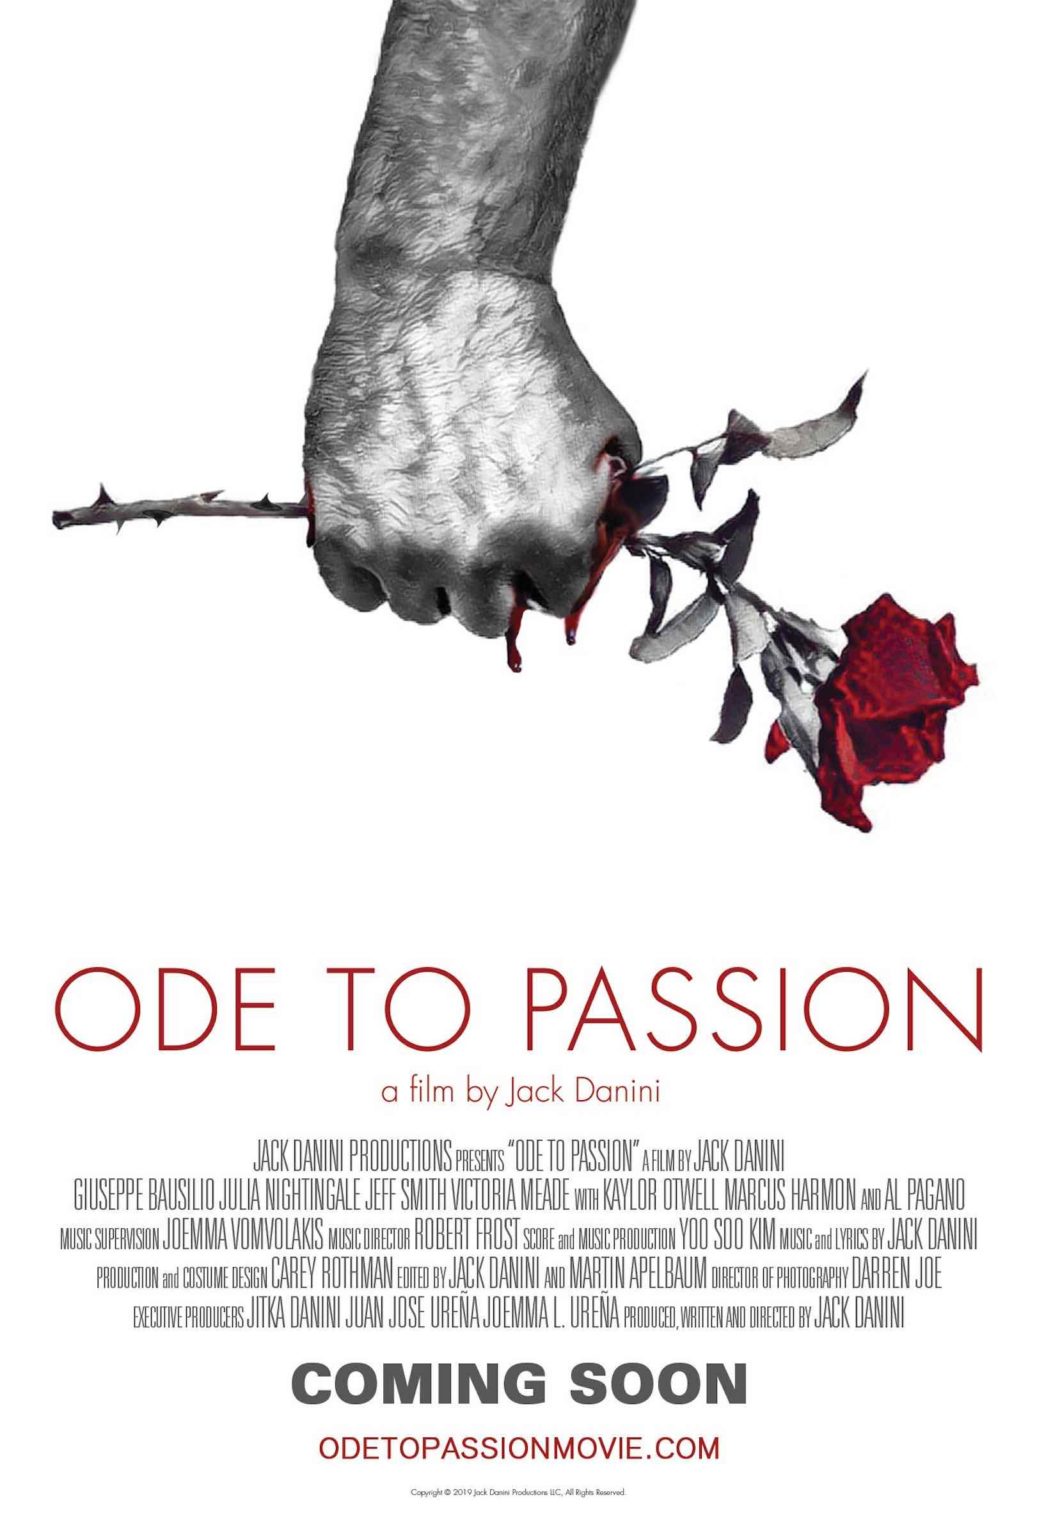 Filmmaker Jack Danini is releasing highly anticipated 'Ode to Passion'. We had the pleasure of chatting with Danini about his debut.